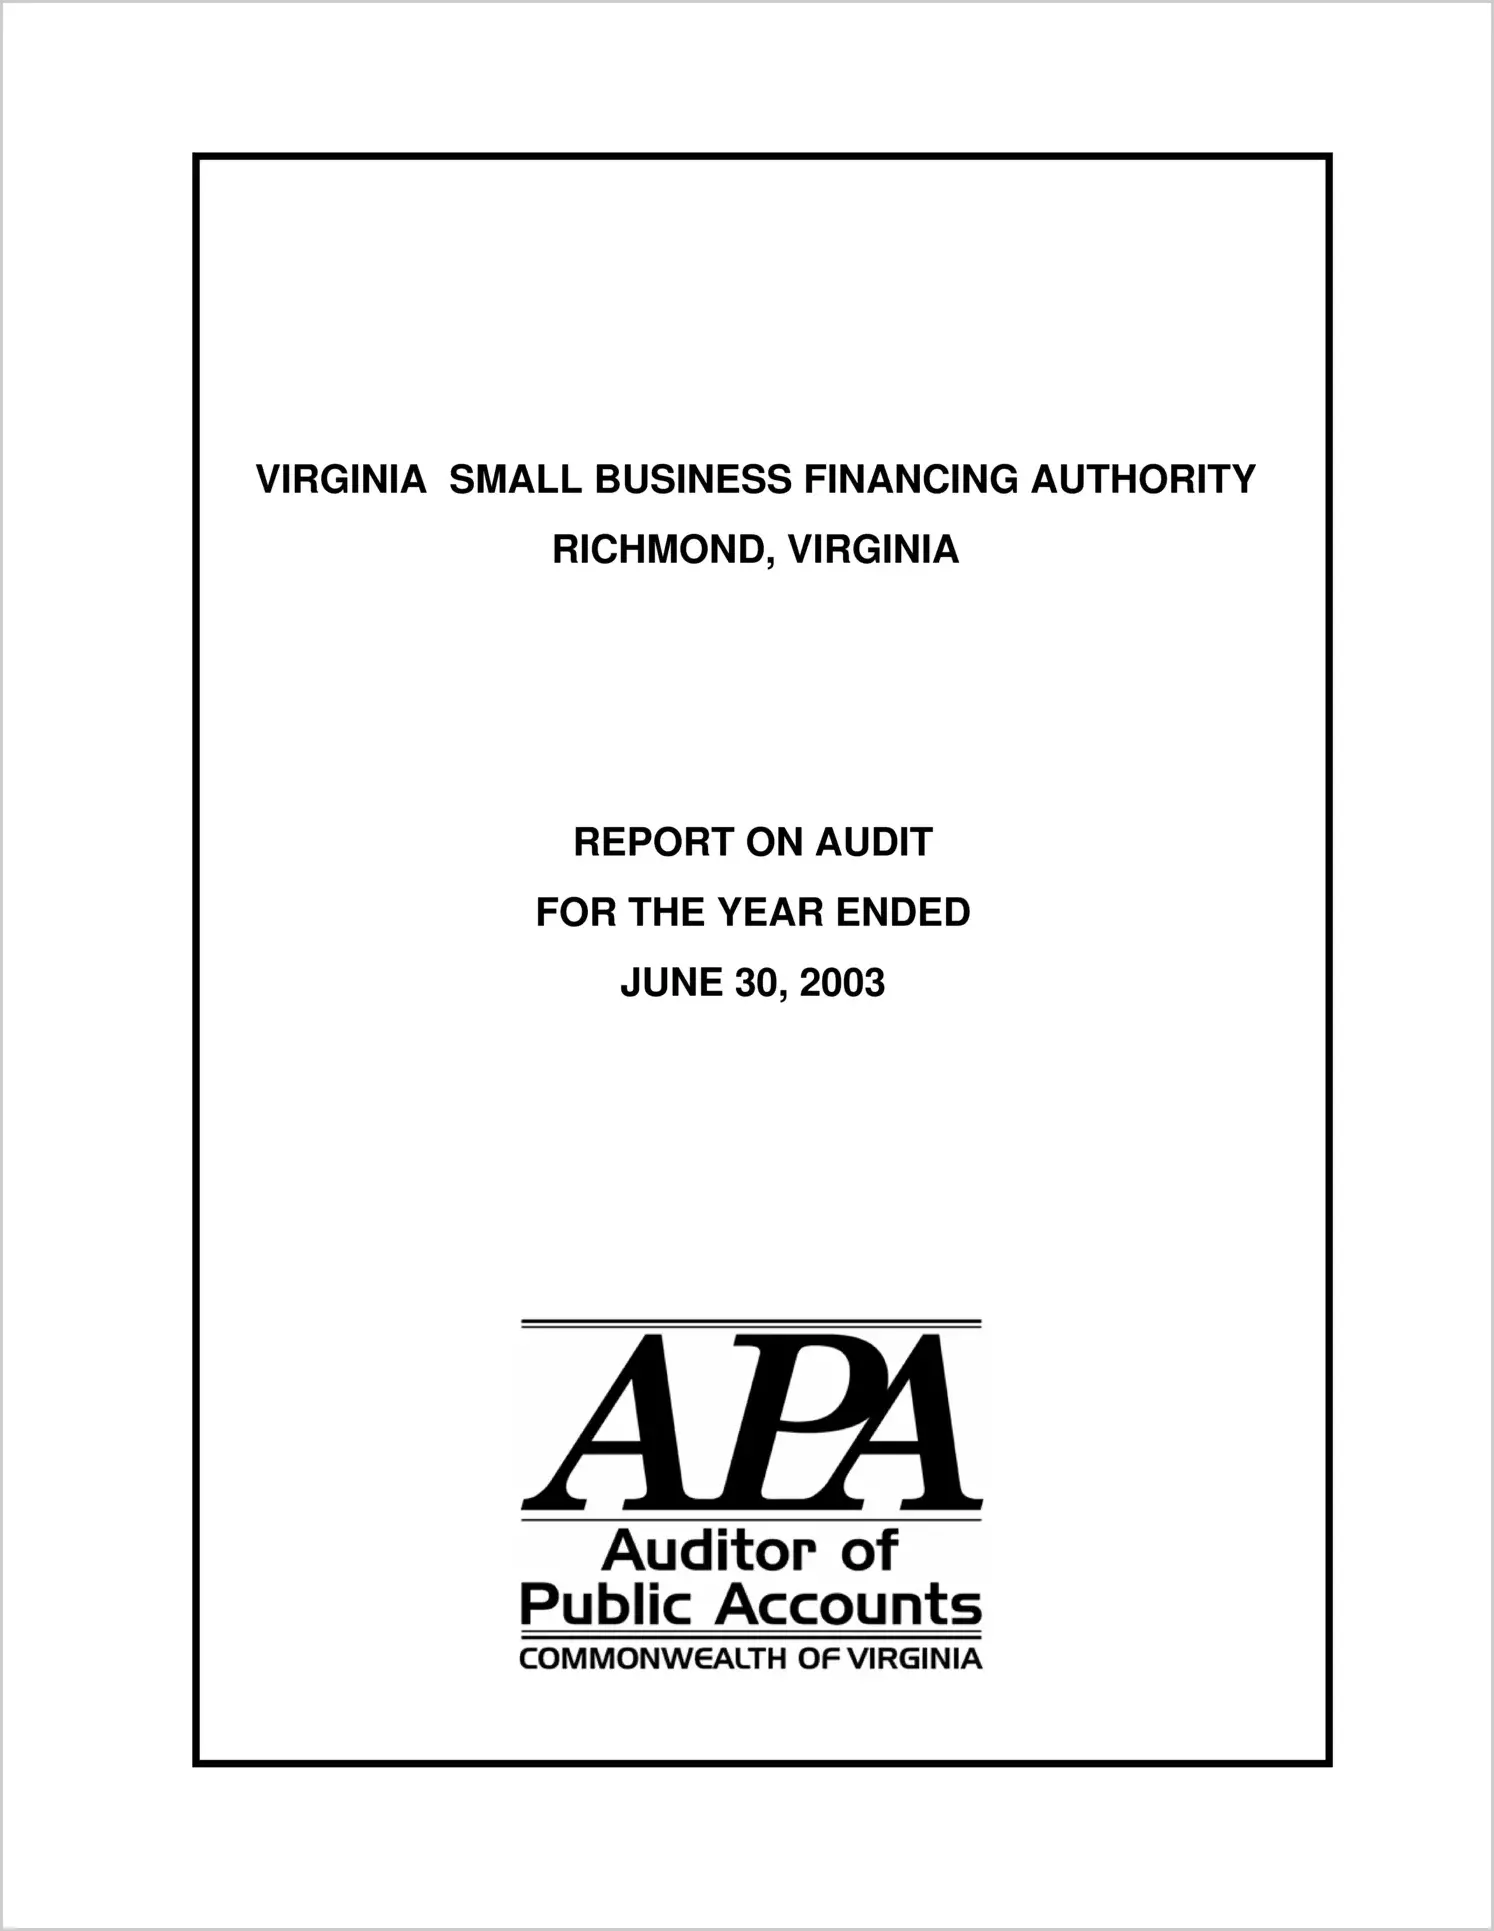 Virginia Small Business Financing Authority for the year ended June 30, 2003